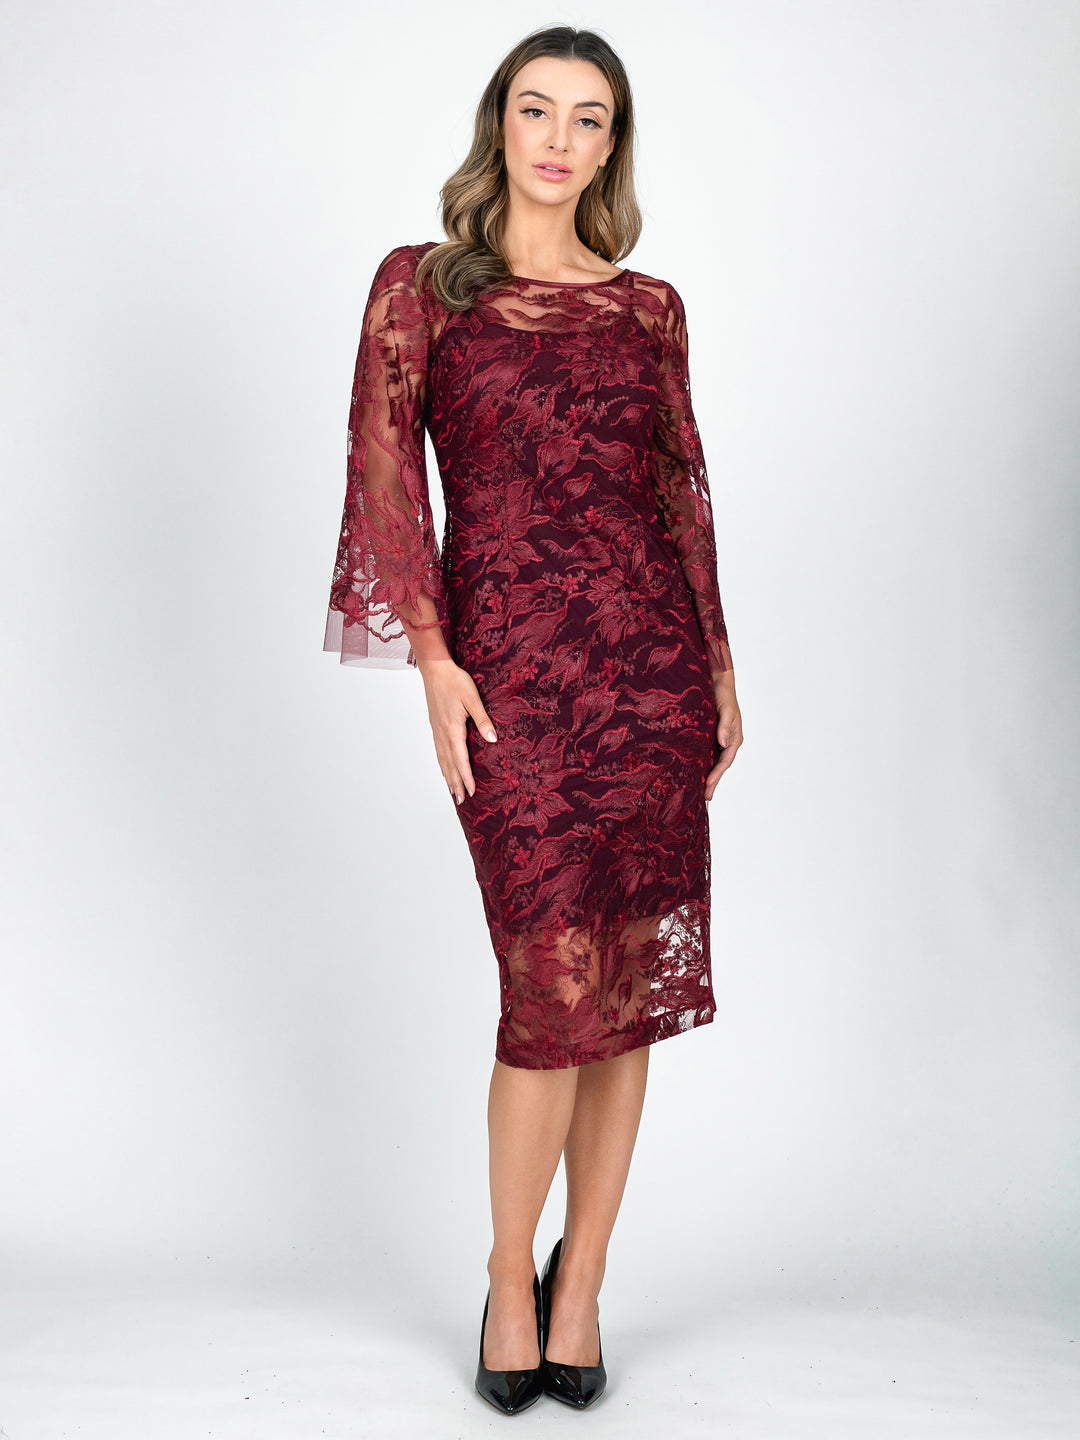 Burgundy 3/4 Sleeve Cocktail dress for Mother of the Bride Groom or wedding guest made from botanical floral embroidered lace